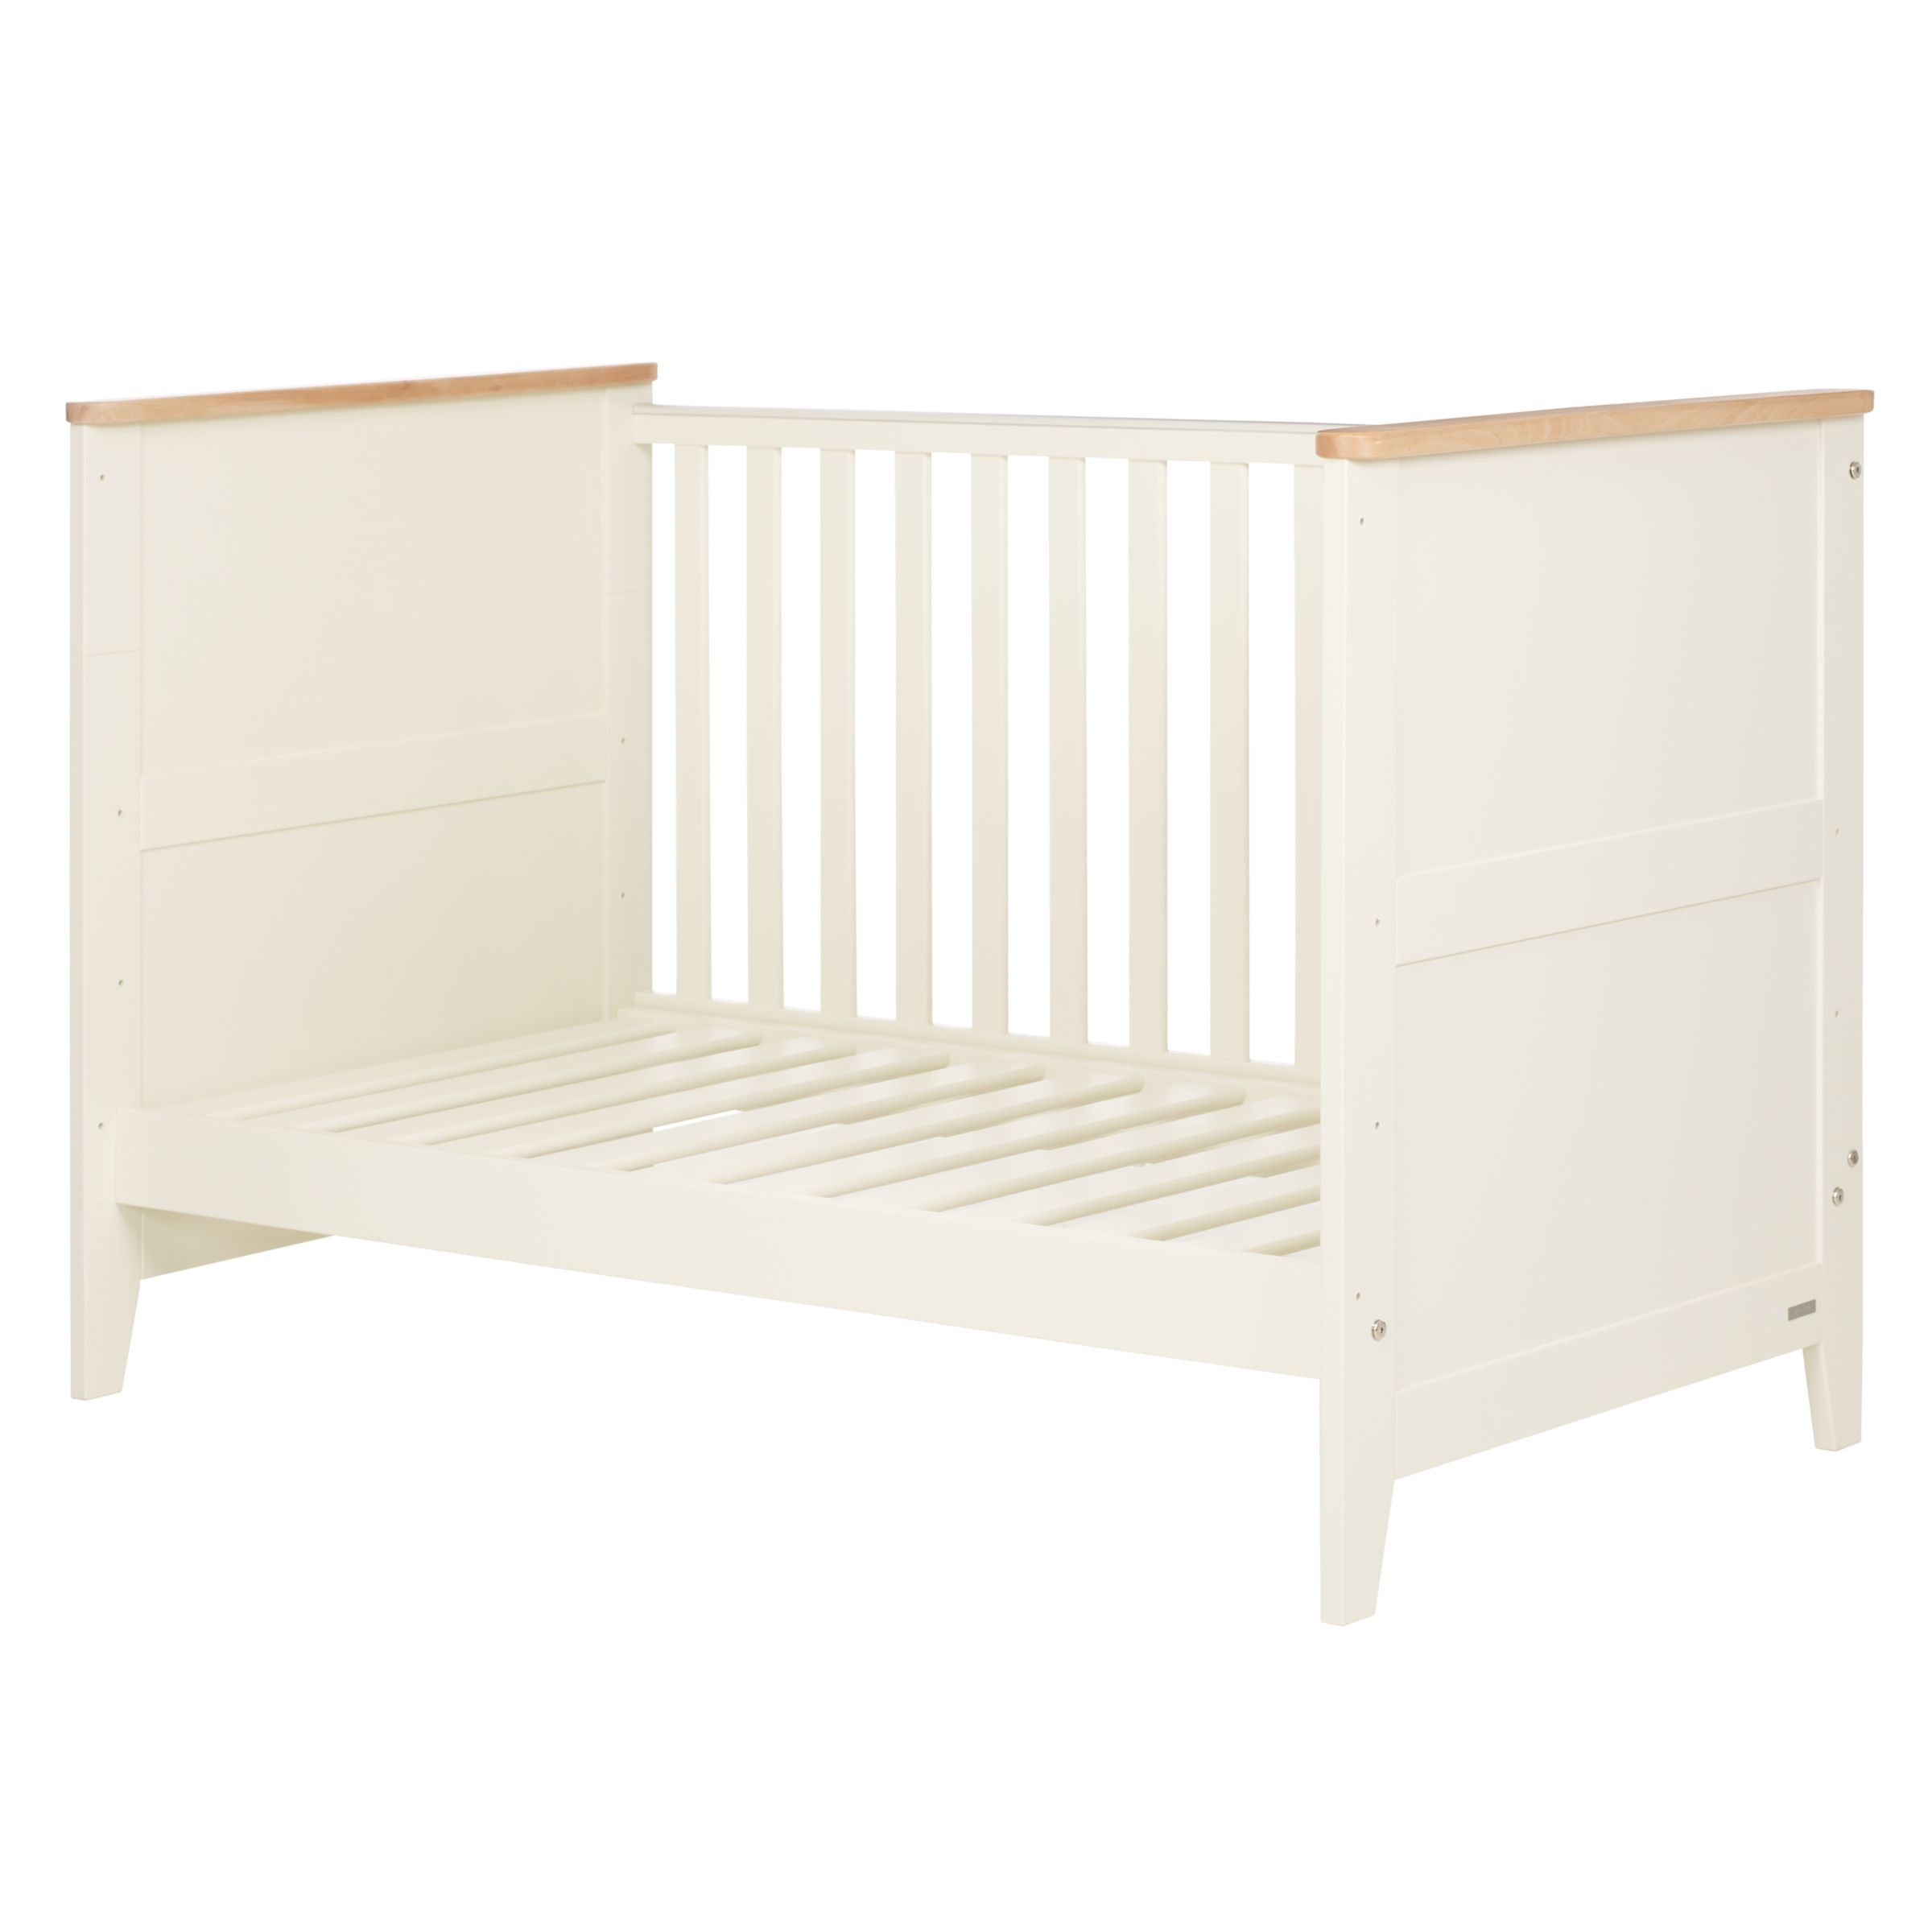 John Lewis Nouveau Cot/Daybed, Ivory at John Lewis